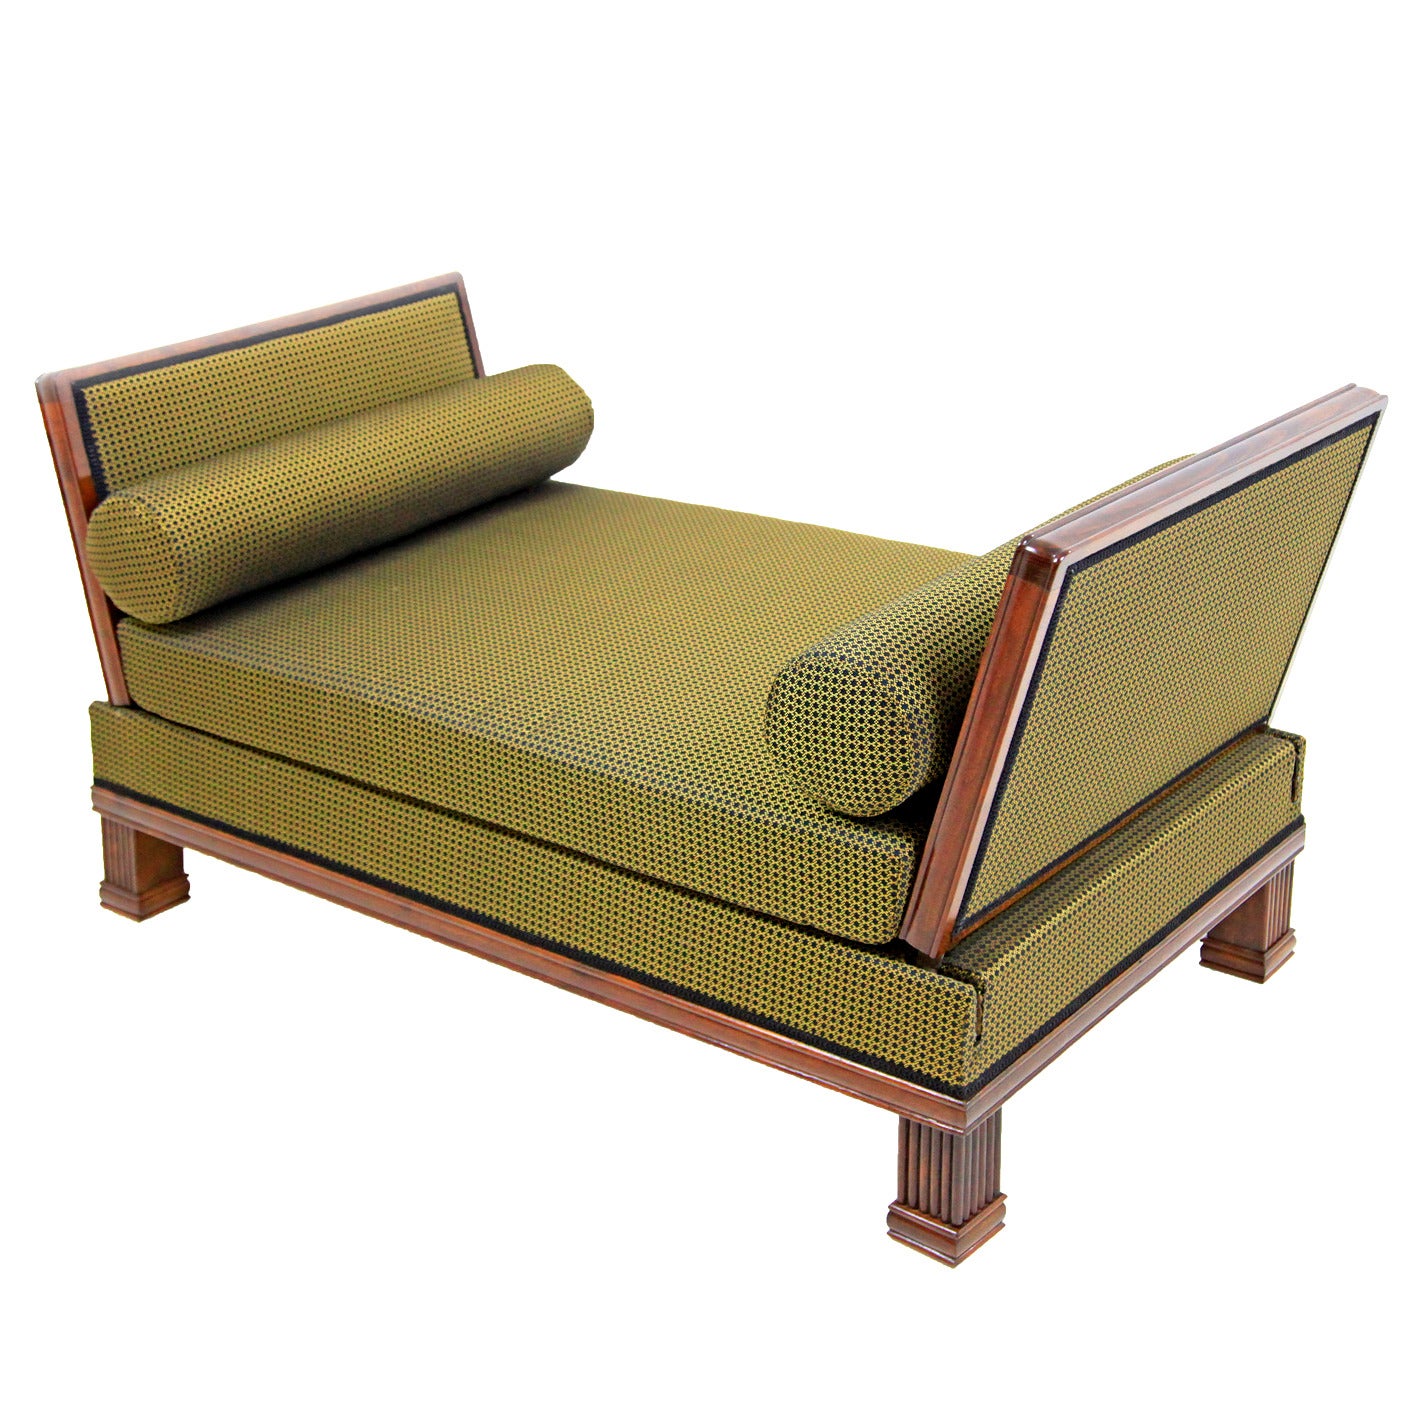 French Art Deco Daybed / Recliner from the 1920s